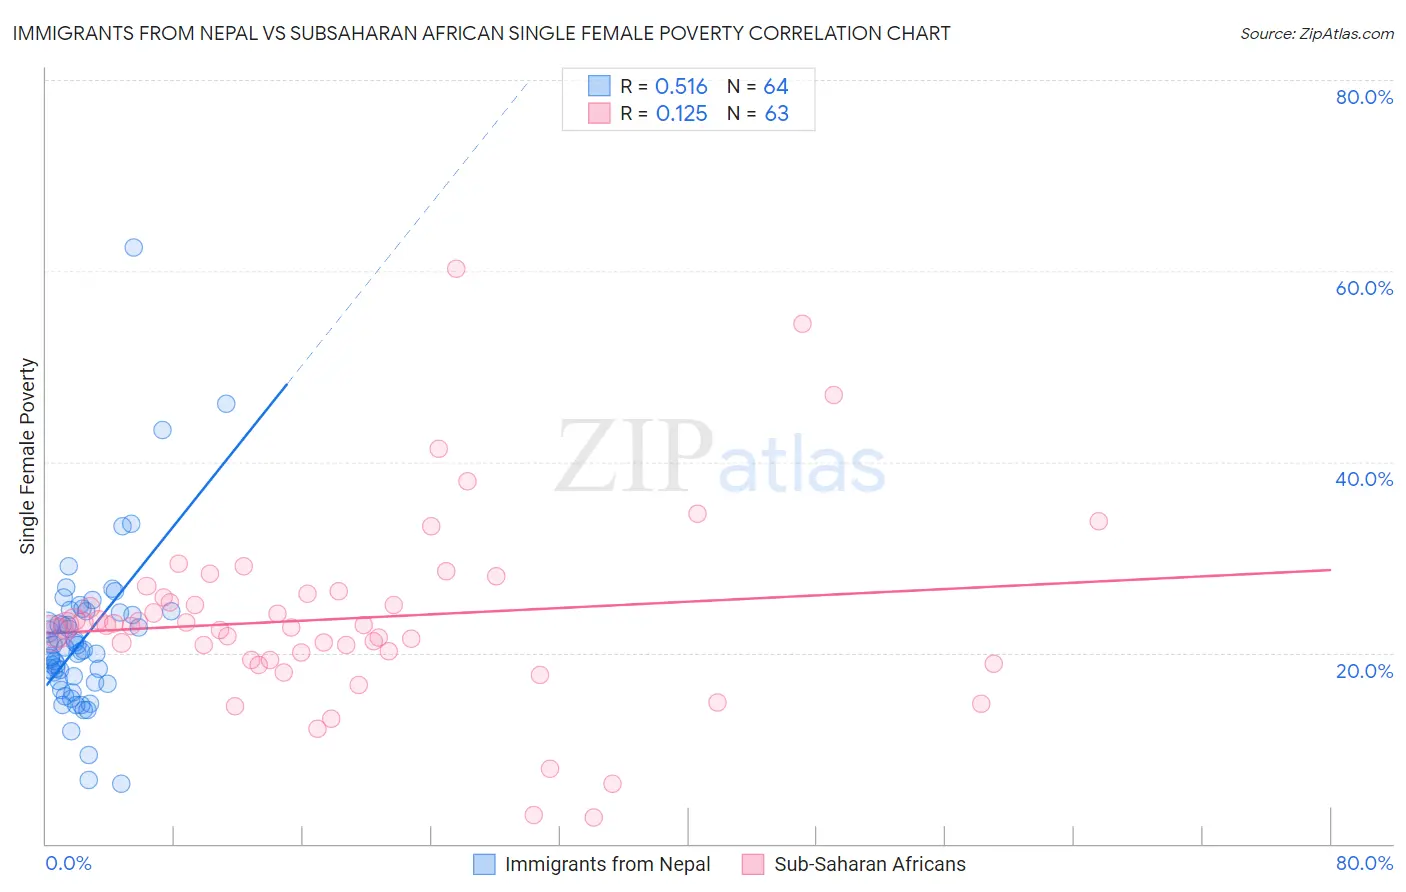 Immigrants from Nepal vs Subsaharan African Single Female Poverty